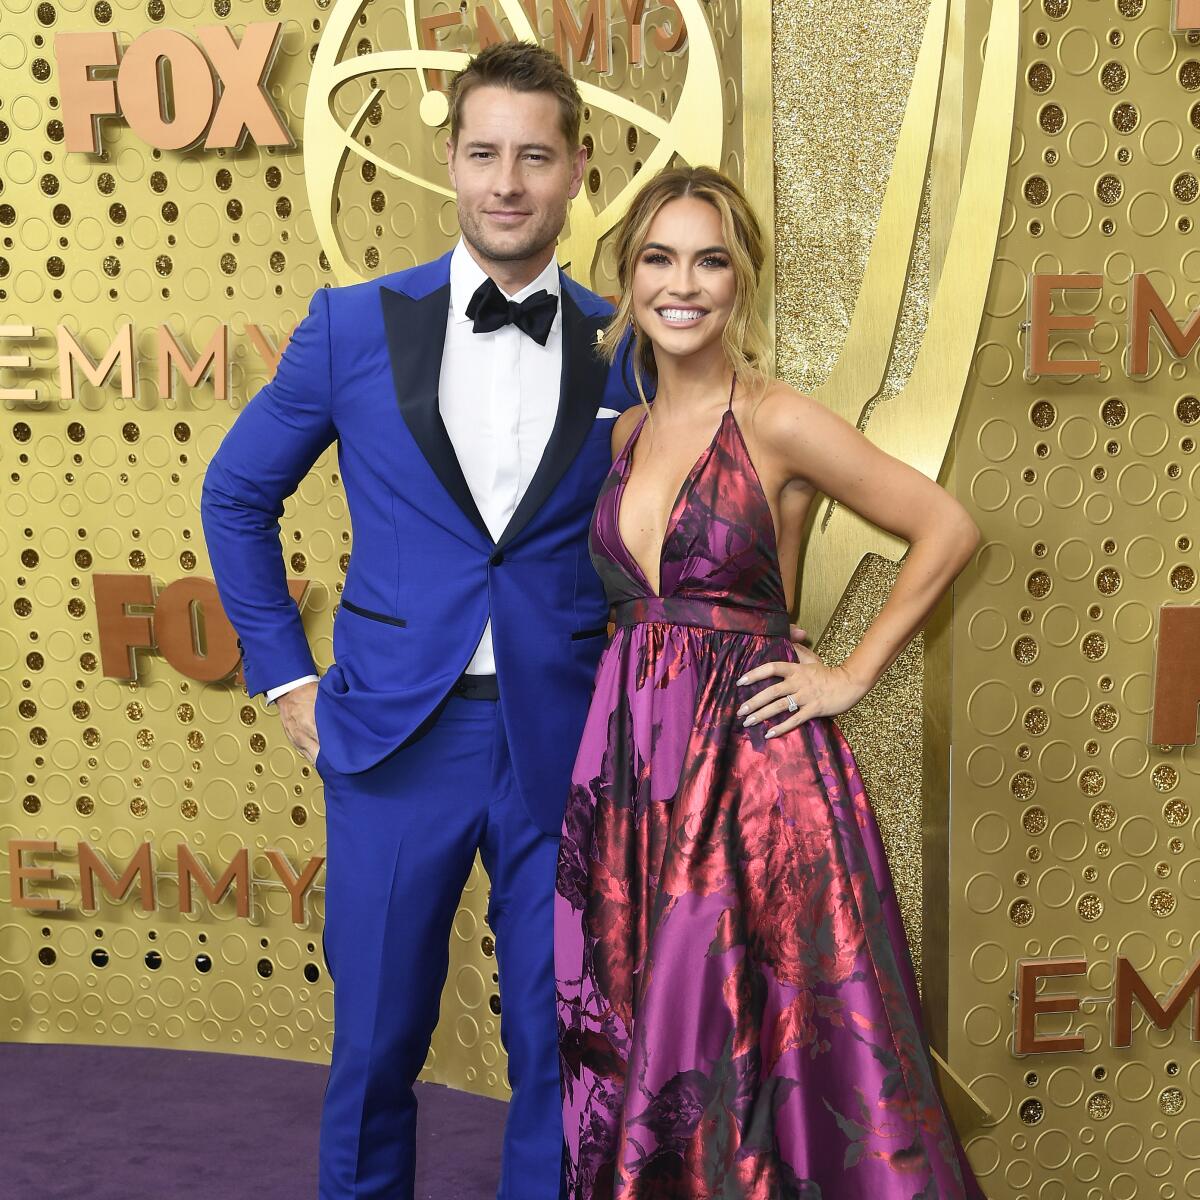 Justin Hartley and Chrishell Stause's split is recounted in the third season of "Selling Sunset."